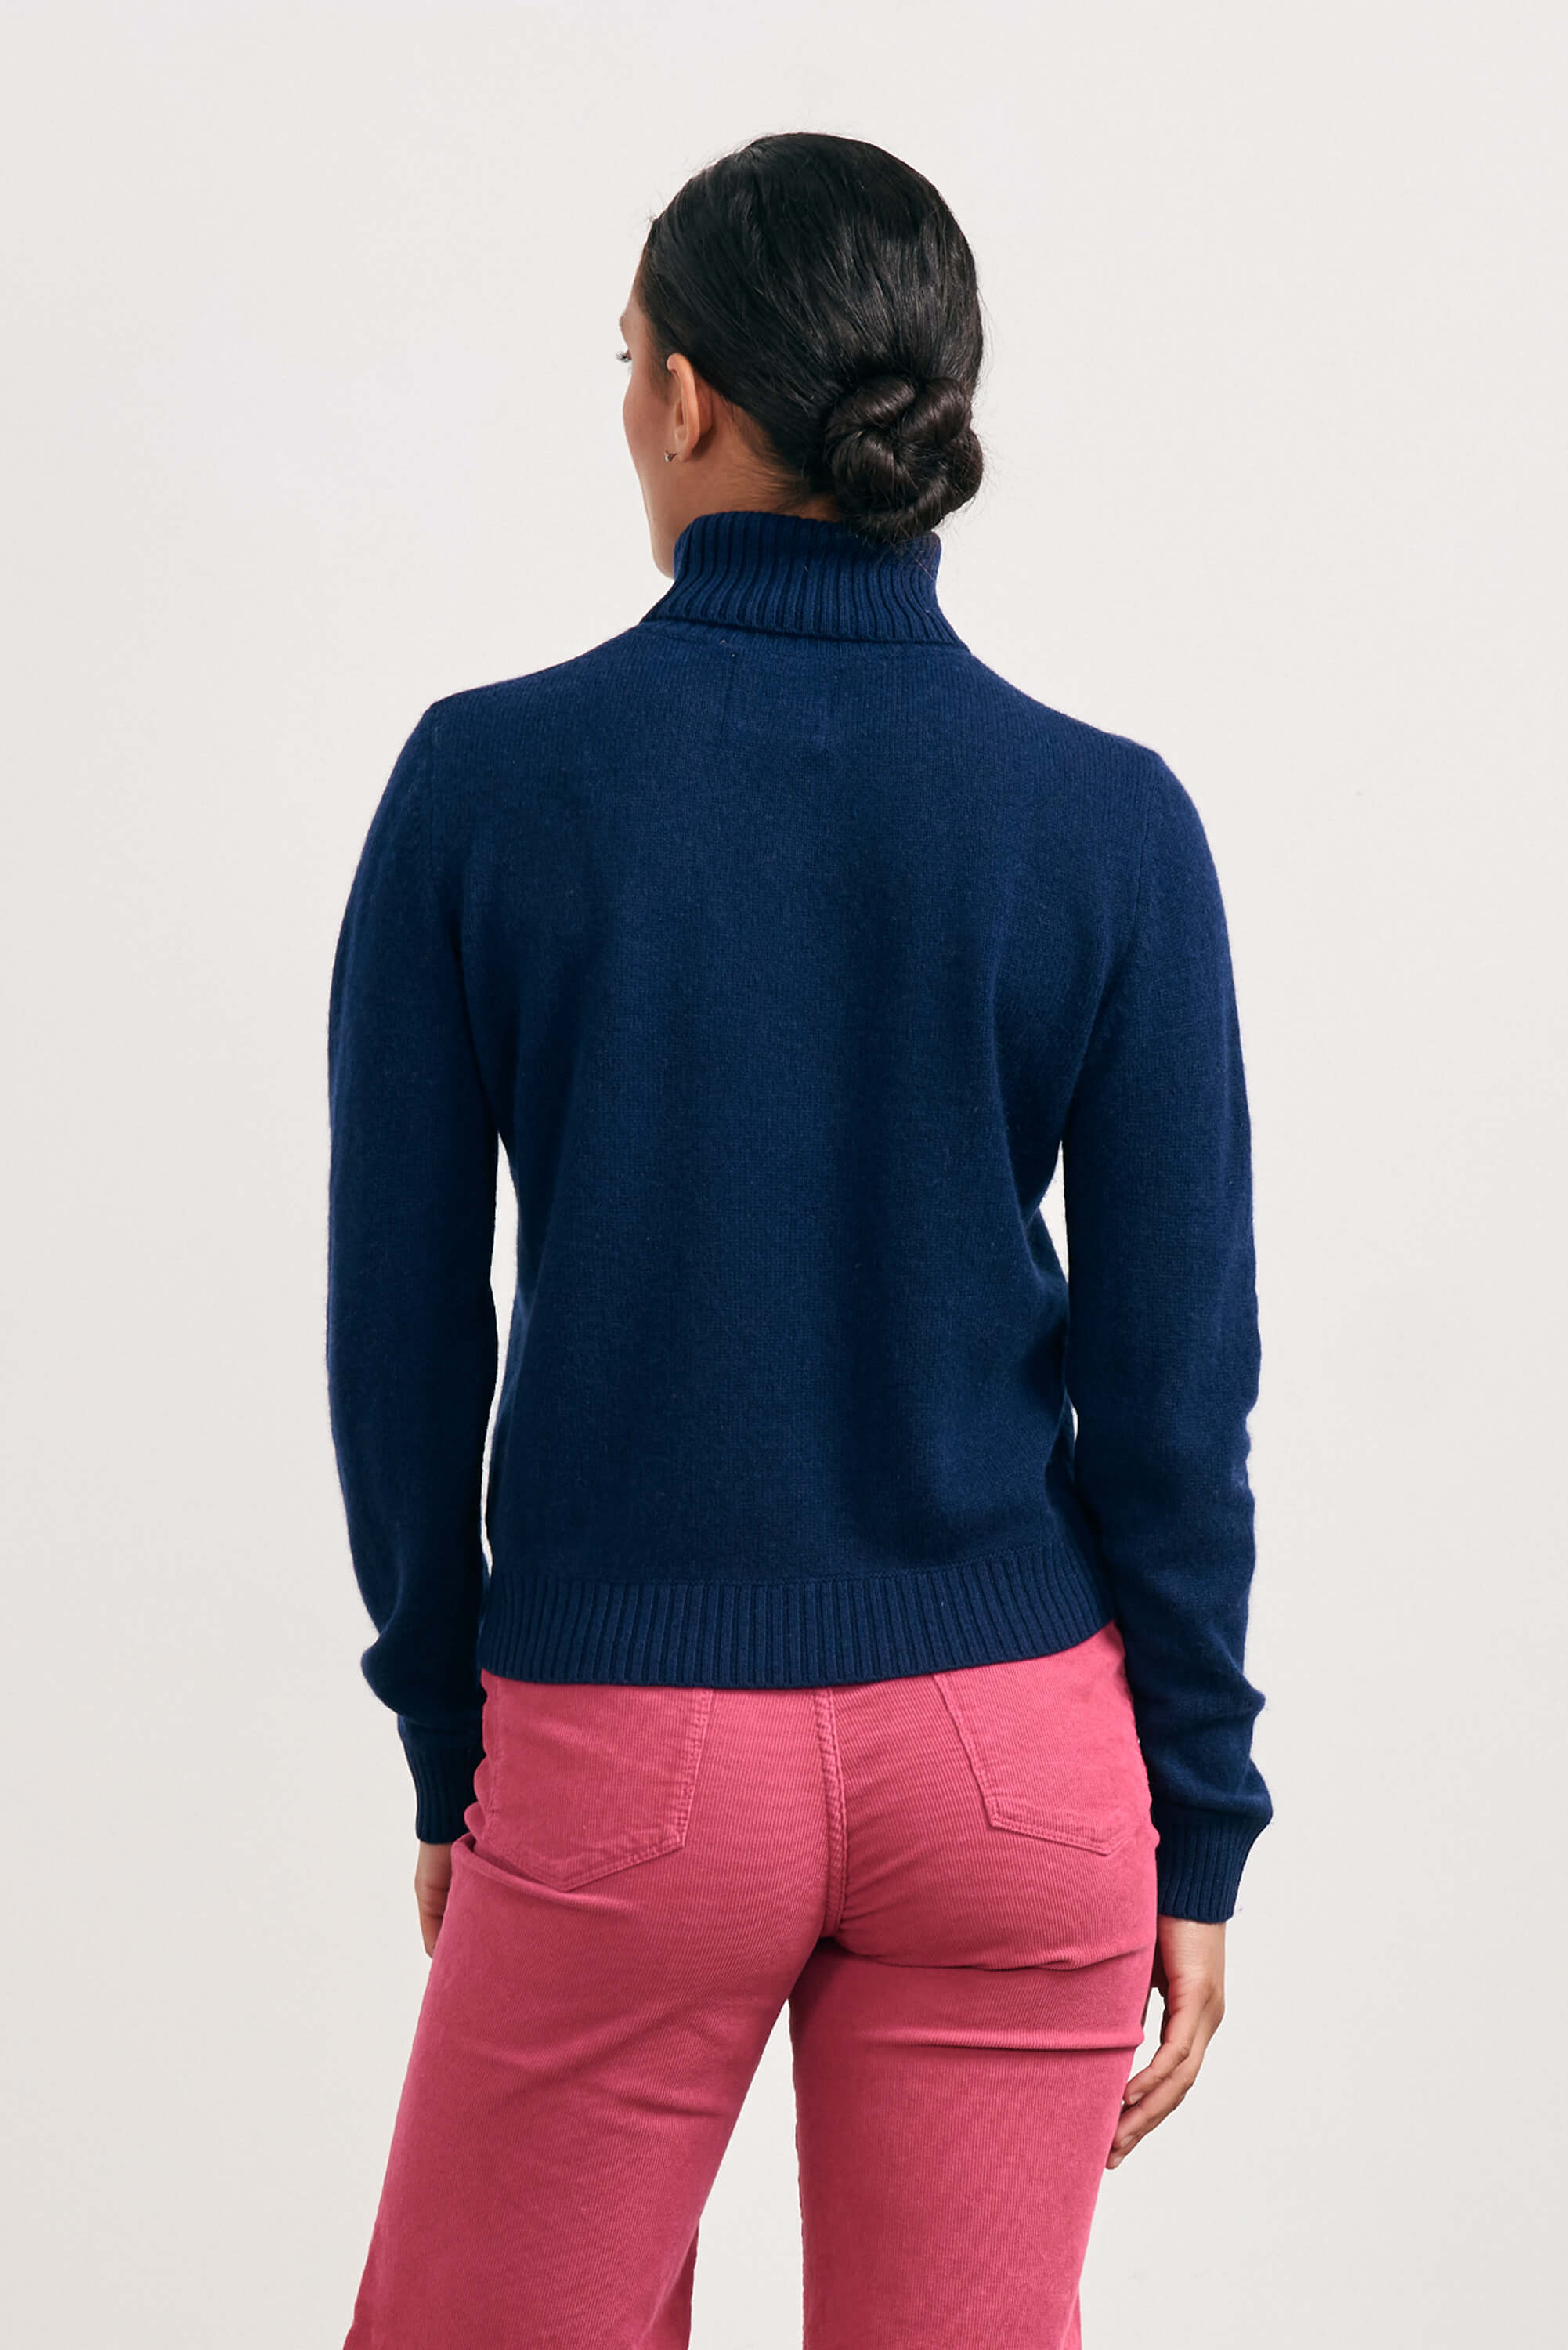 Brown haired female model wearing Jumper1234 lightweight cashmere roll neck in navy facing away from the camera